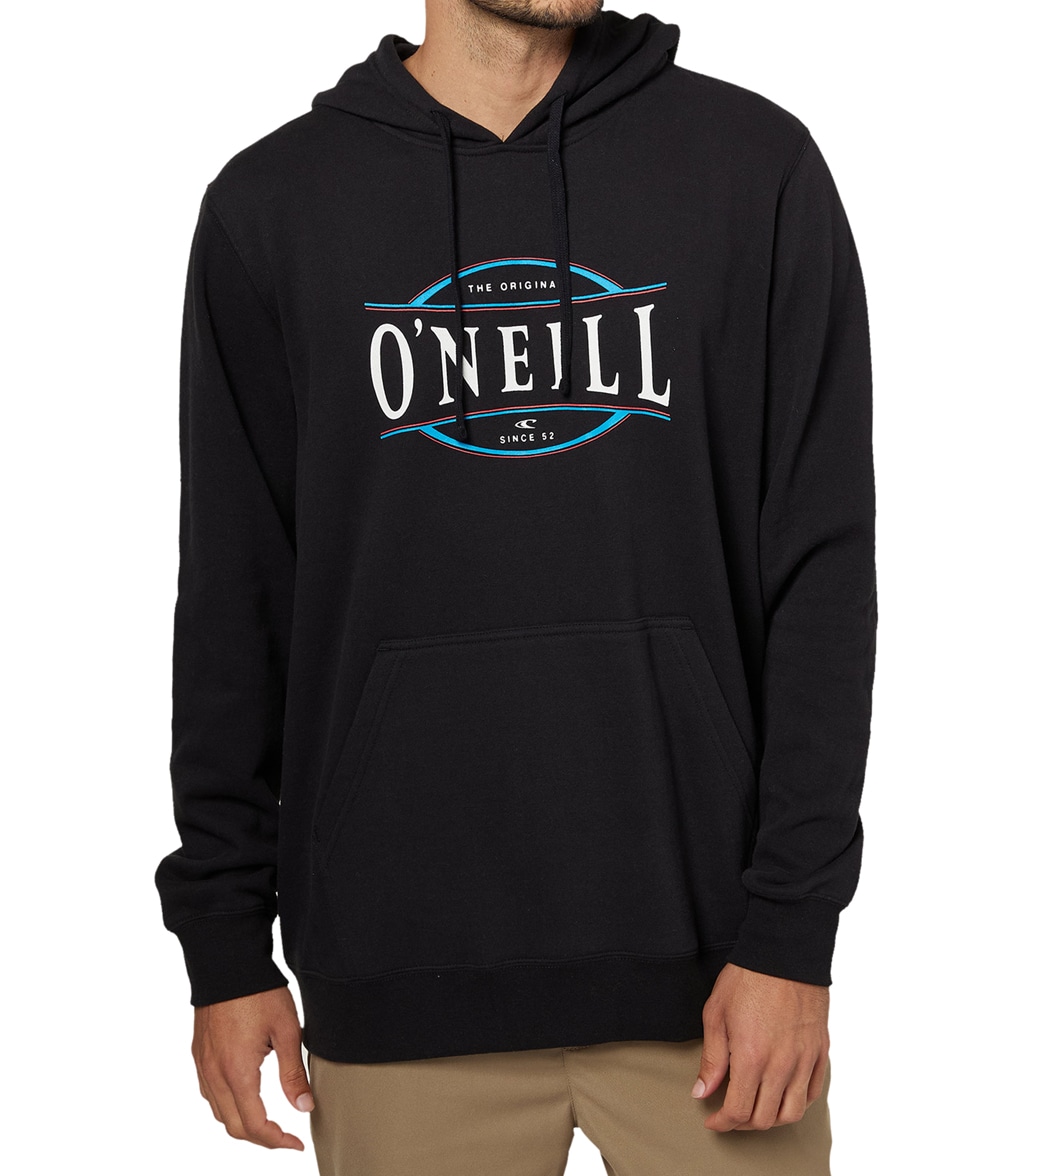 O'neill Men's Breakout Pullover Hoodie - Black Large Cotton/Polyester - Swimoutlet.com